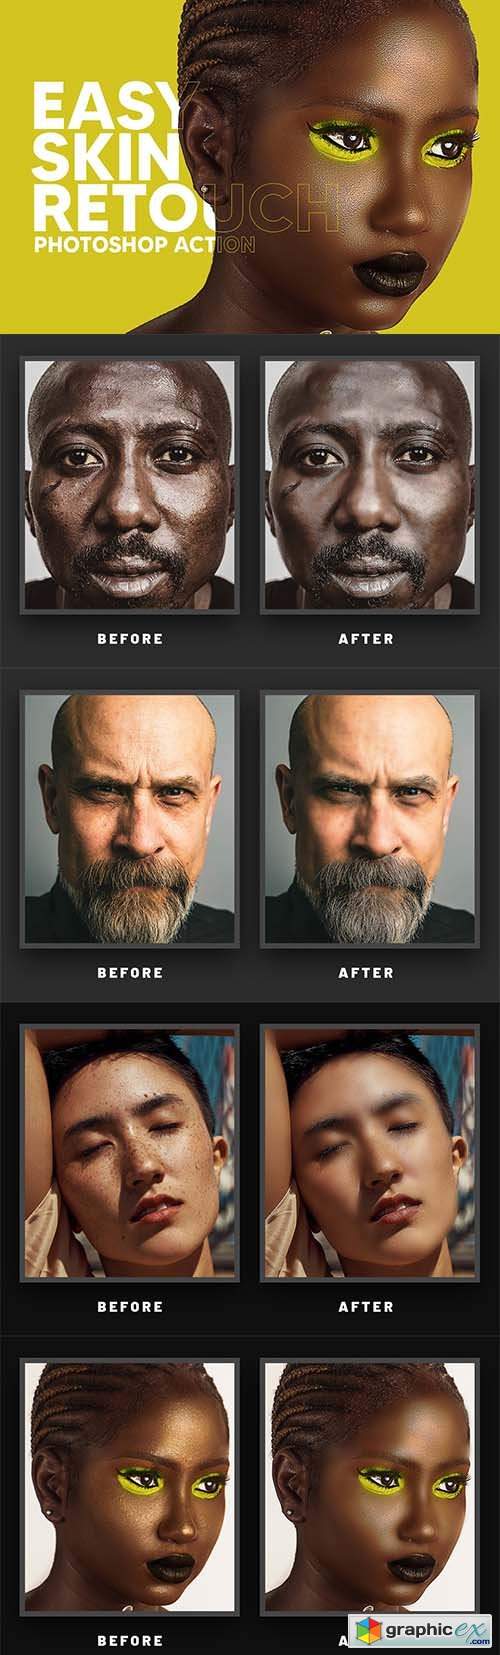 Easy Skin Retouch Ps Action 